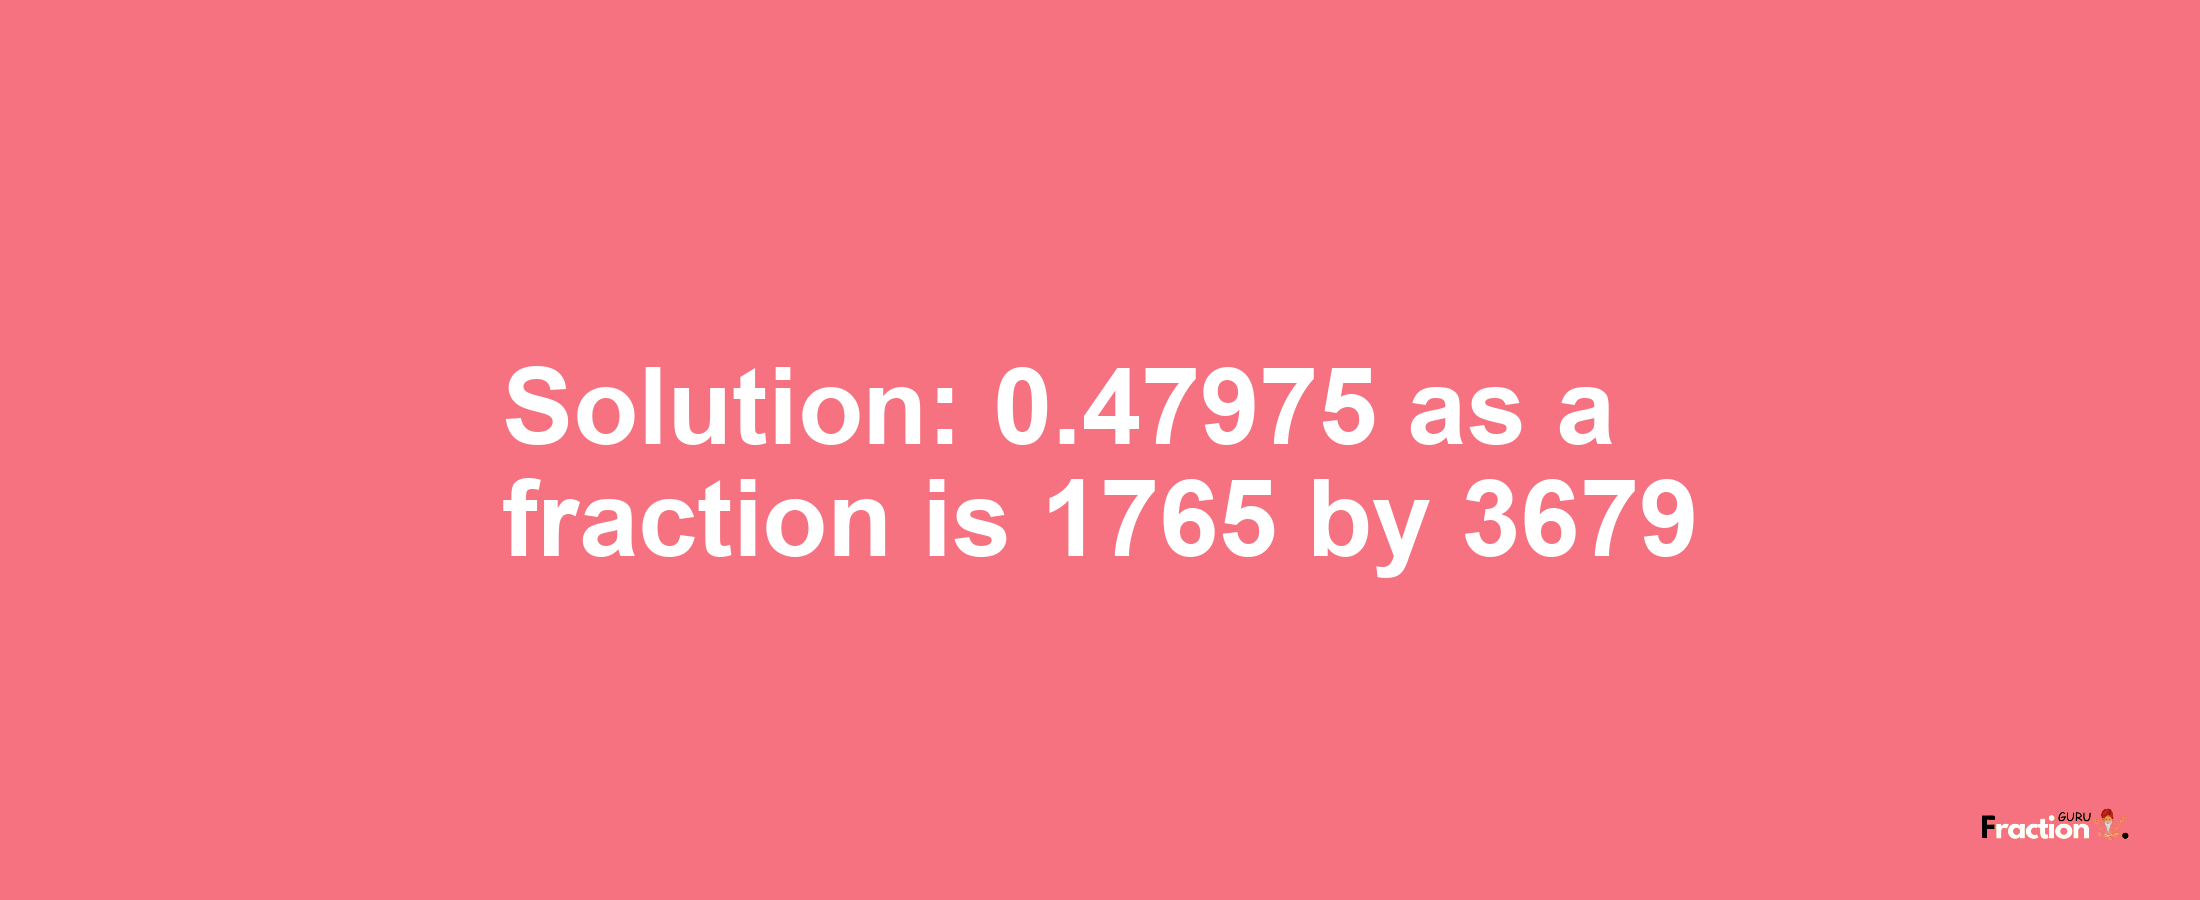 Solution:0.47975 as a fraction is 1765/3679